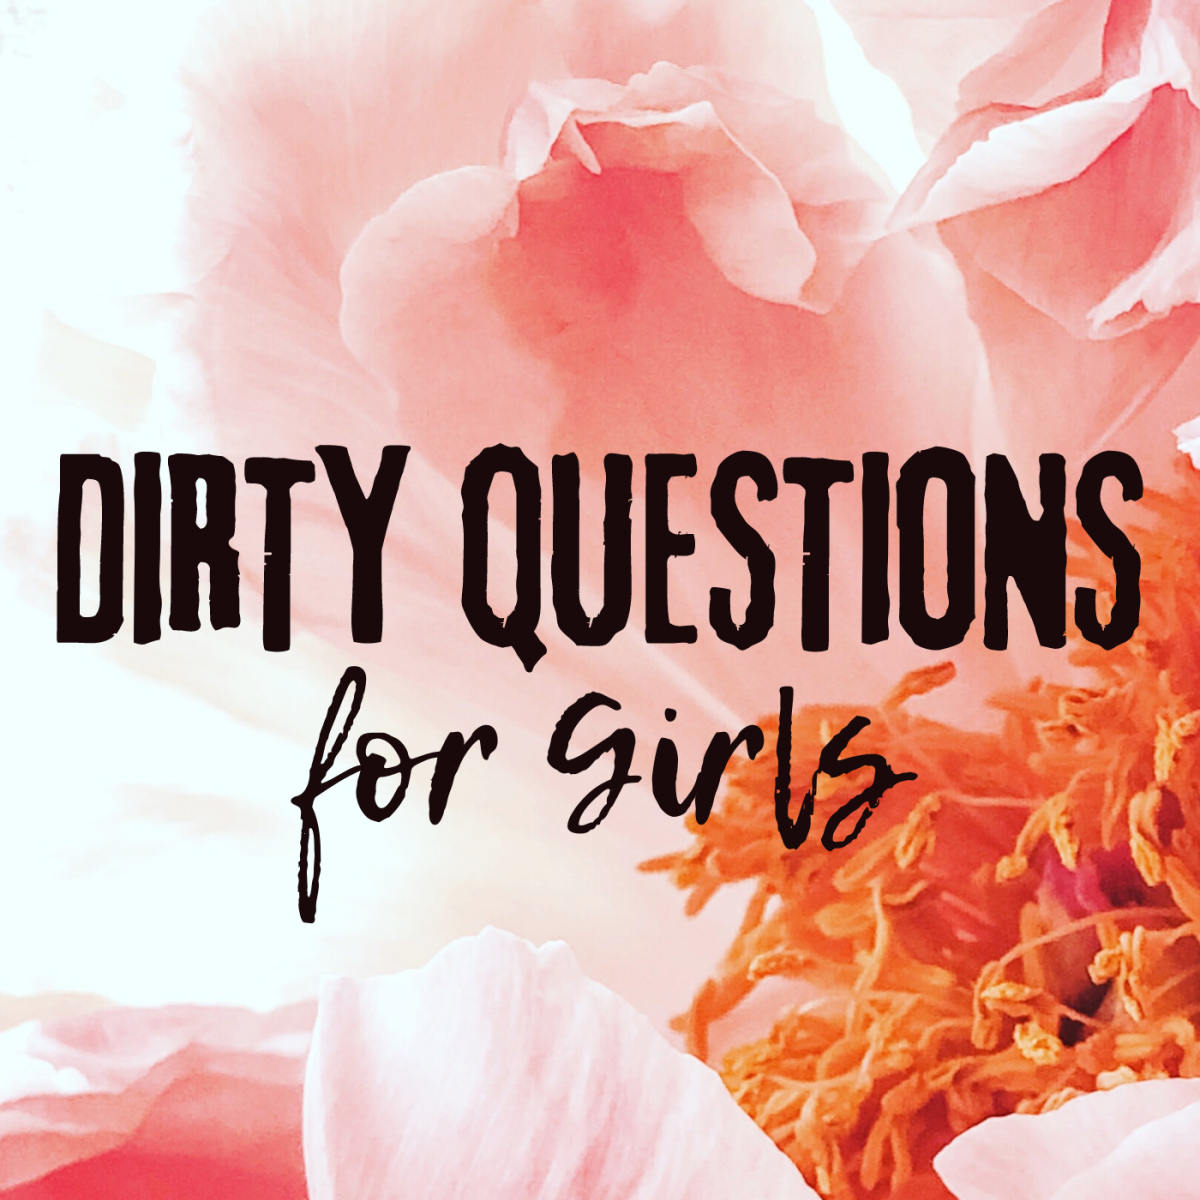 100+ Dirty Questions to Ask a Girl